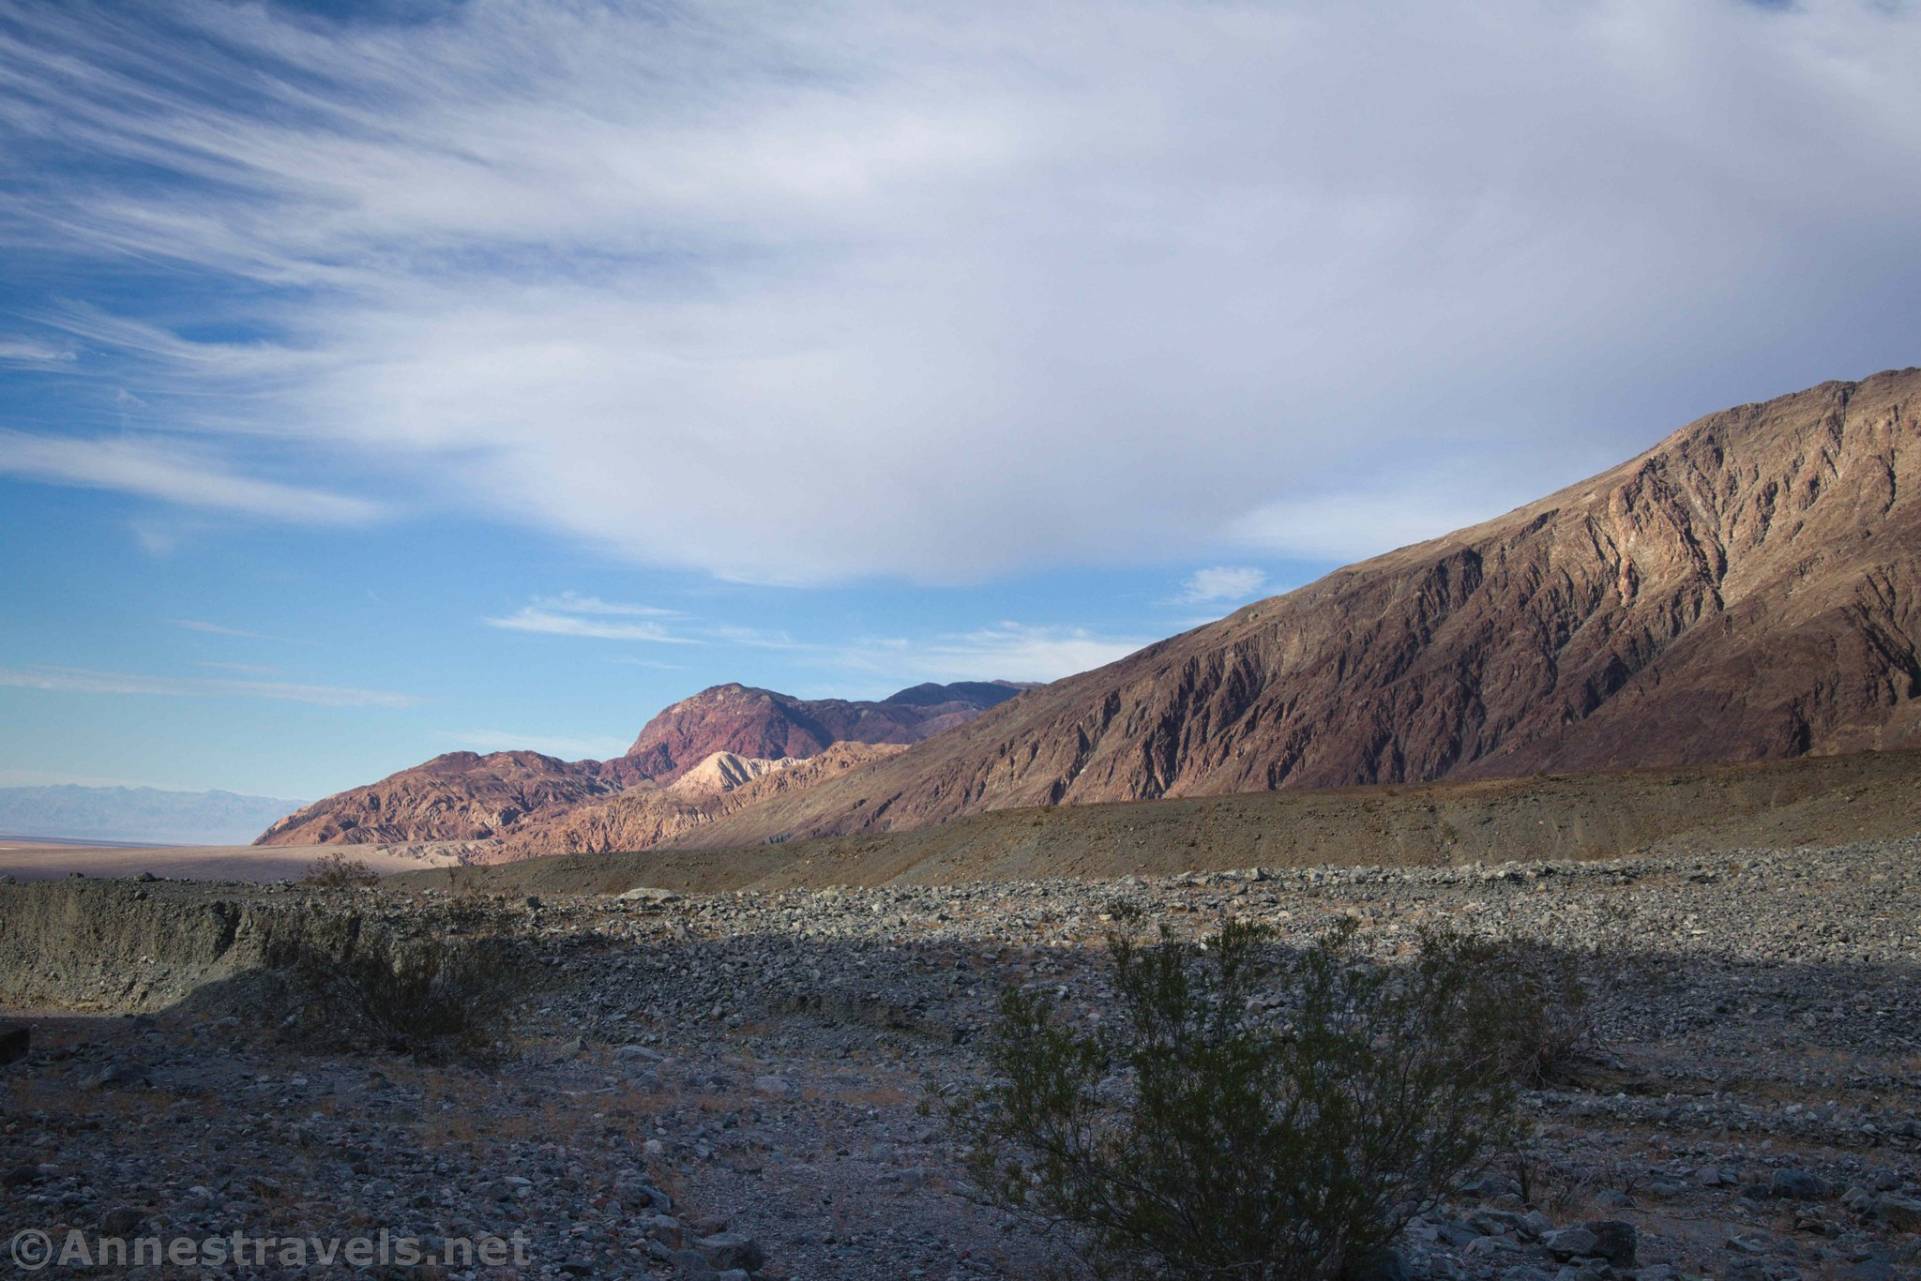 The Black Mountains from near Willow Canyon, Death Valley National Park, California